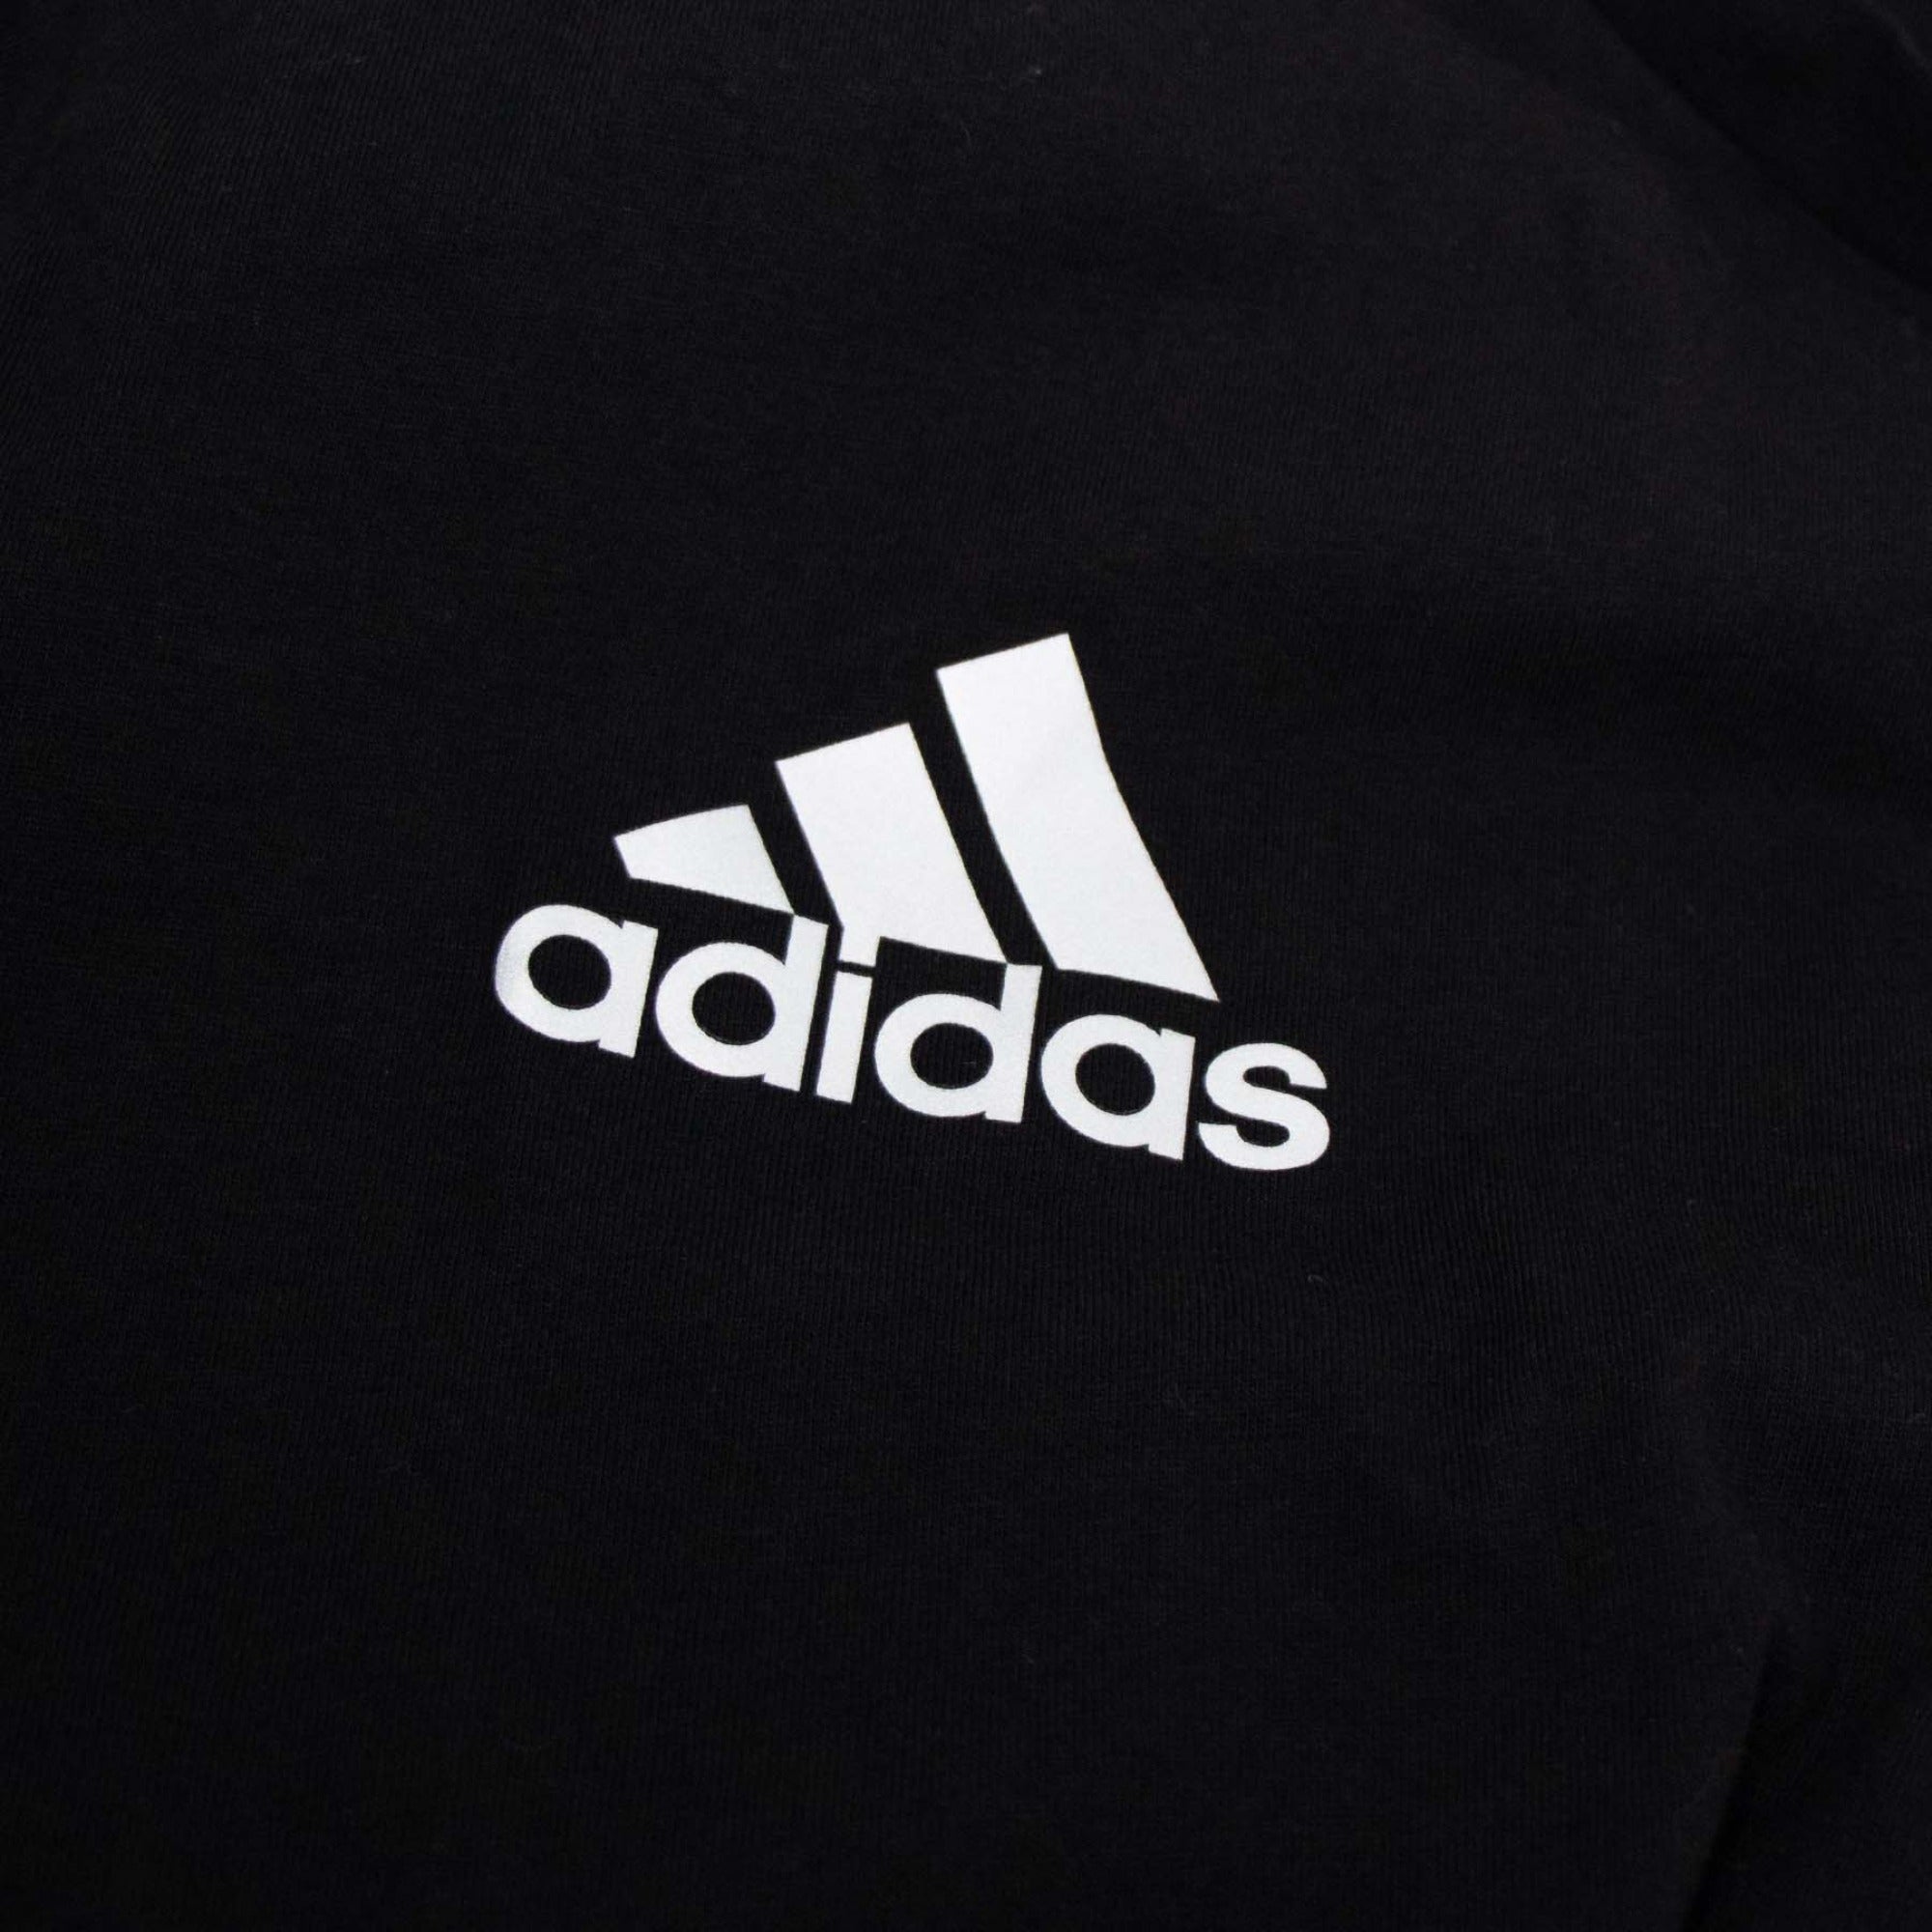 All Blacks Cotton by adidas| New Zealand Rugby Lightweight Tee - Black - World Rugby Shop